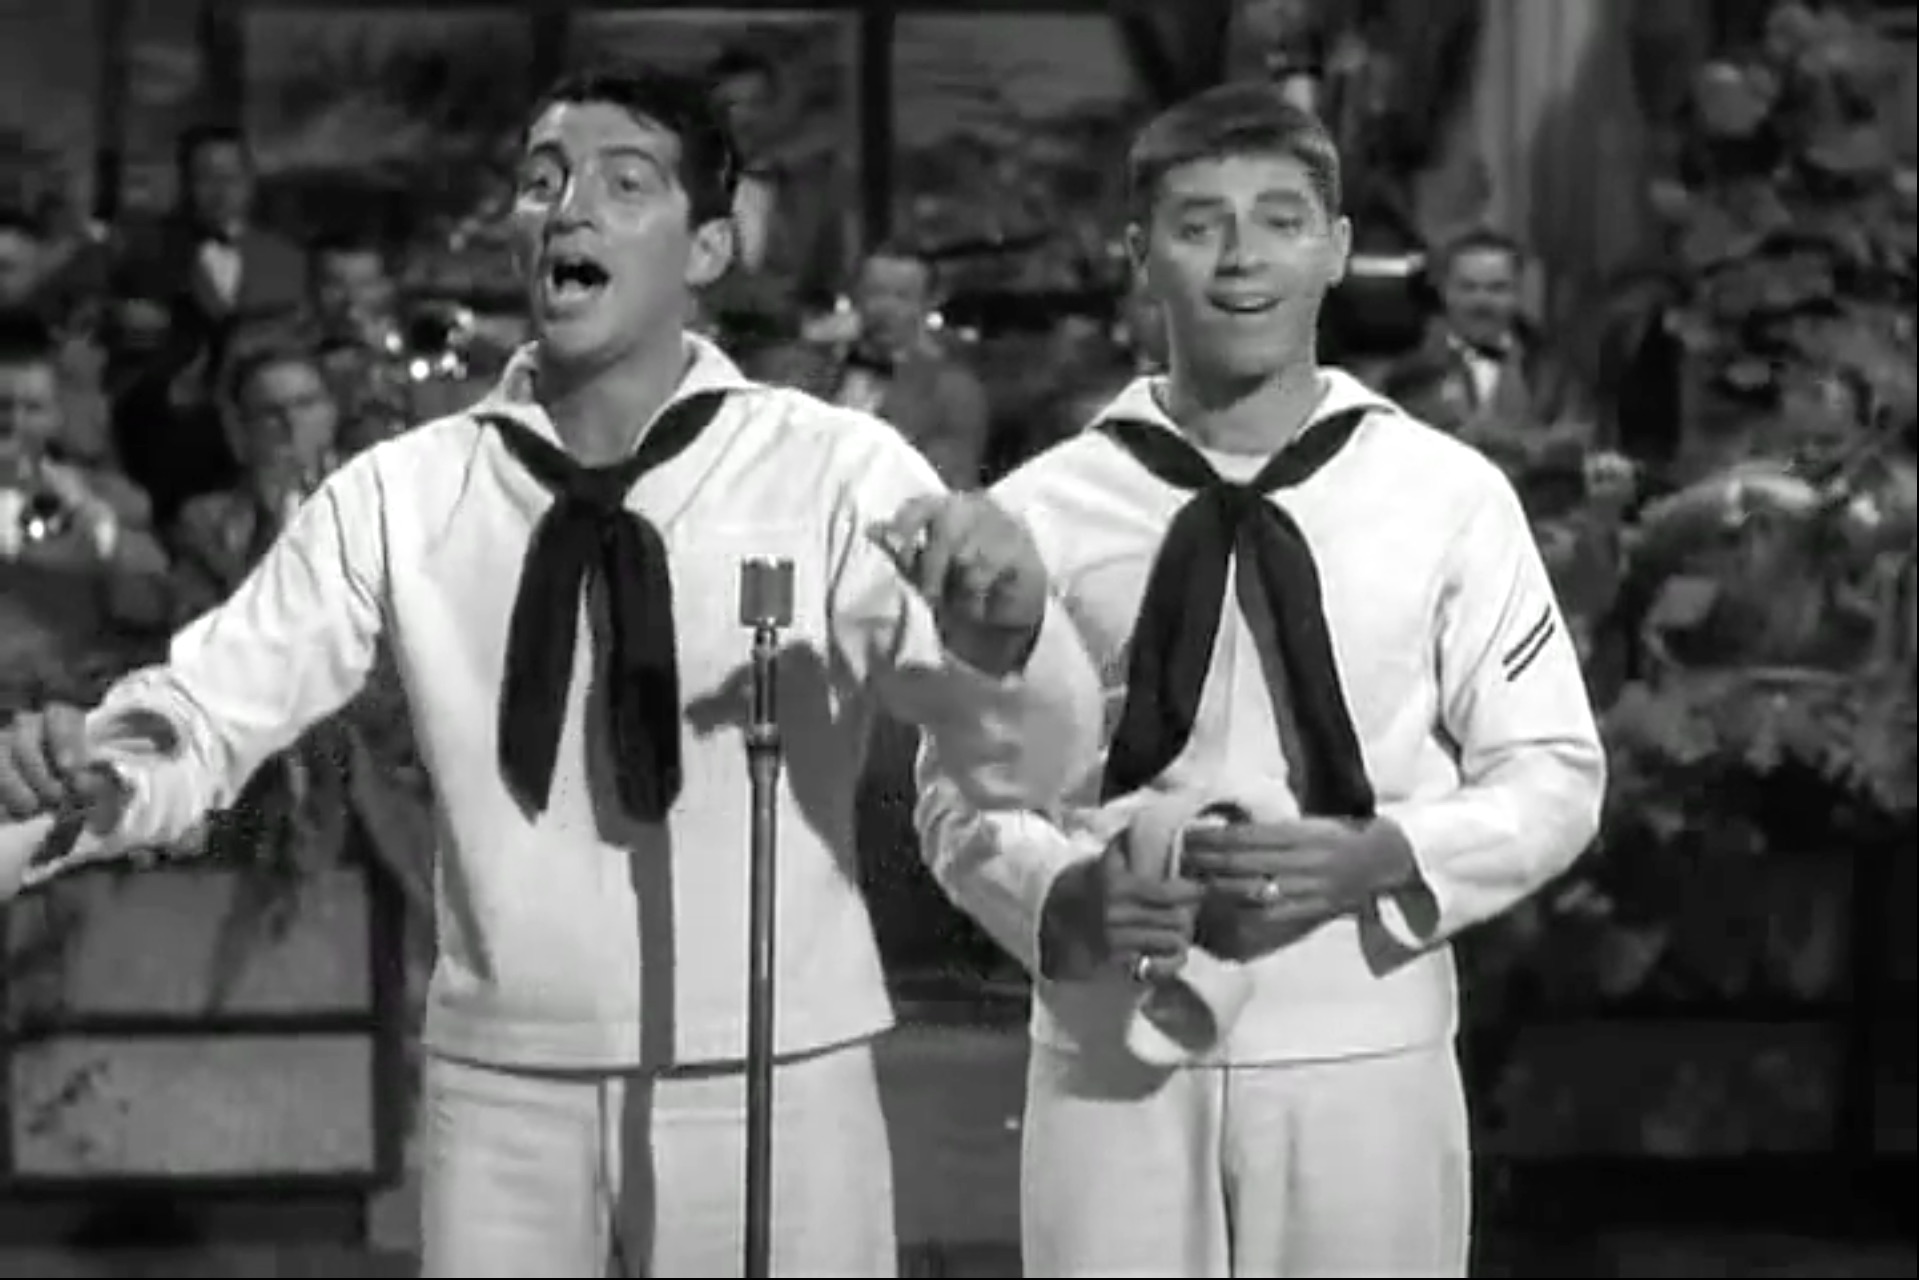 Song lyrics to The Old Calliope, Lyrics by Mack David, Music by Jerry Livingston. Performed by Dean Martin (and Jerry Lewis) in Sailor Beware